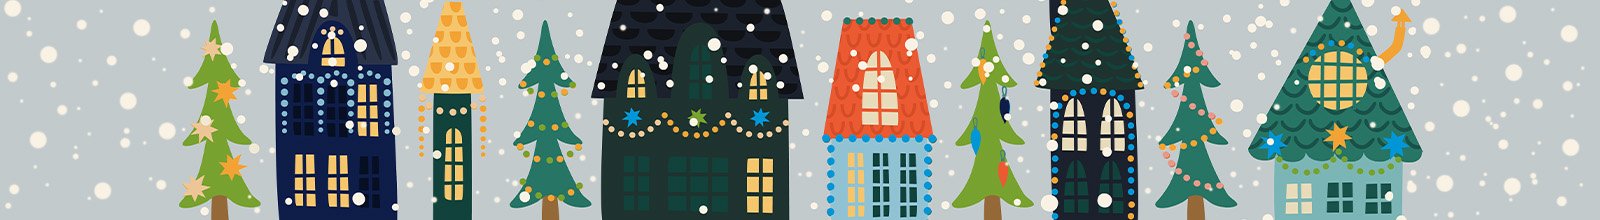 Light Up BWG promo graphic, featuring row of homes and trees with lights and snow